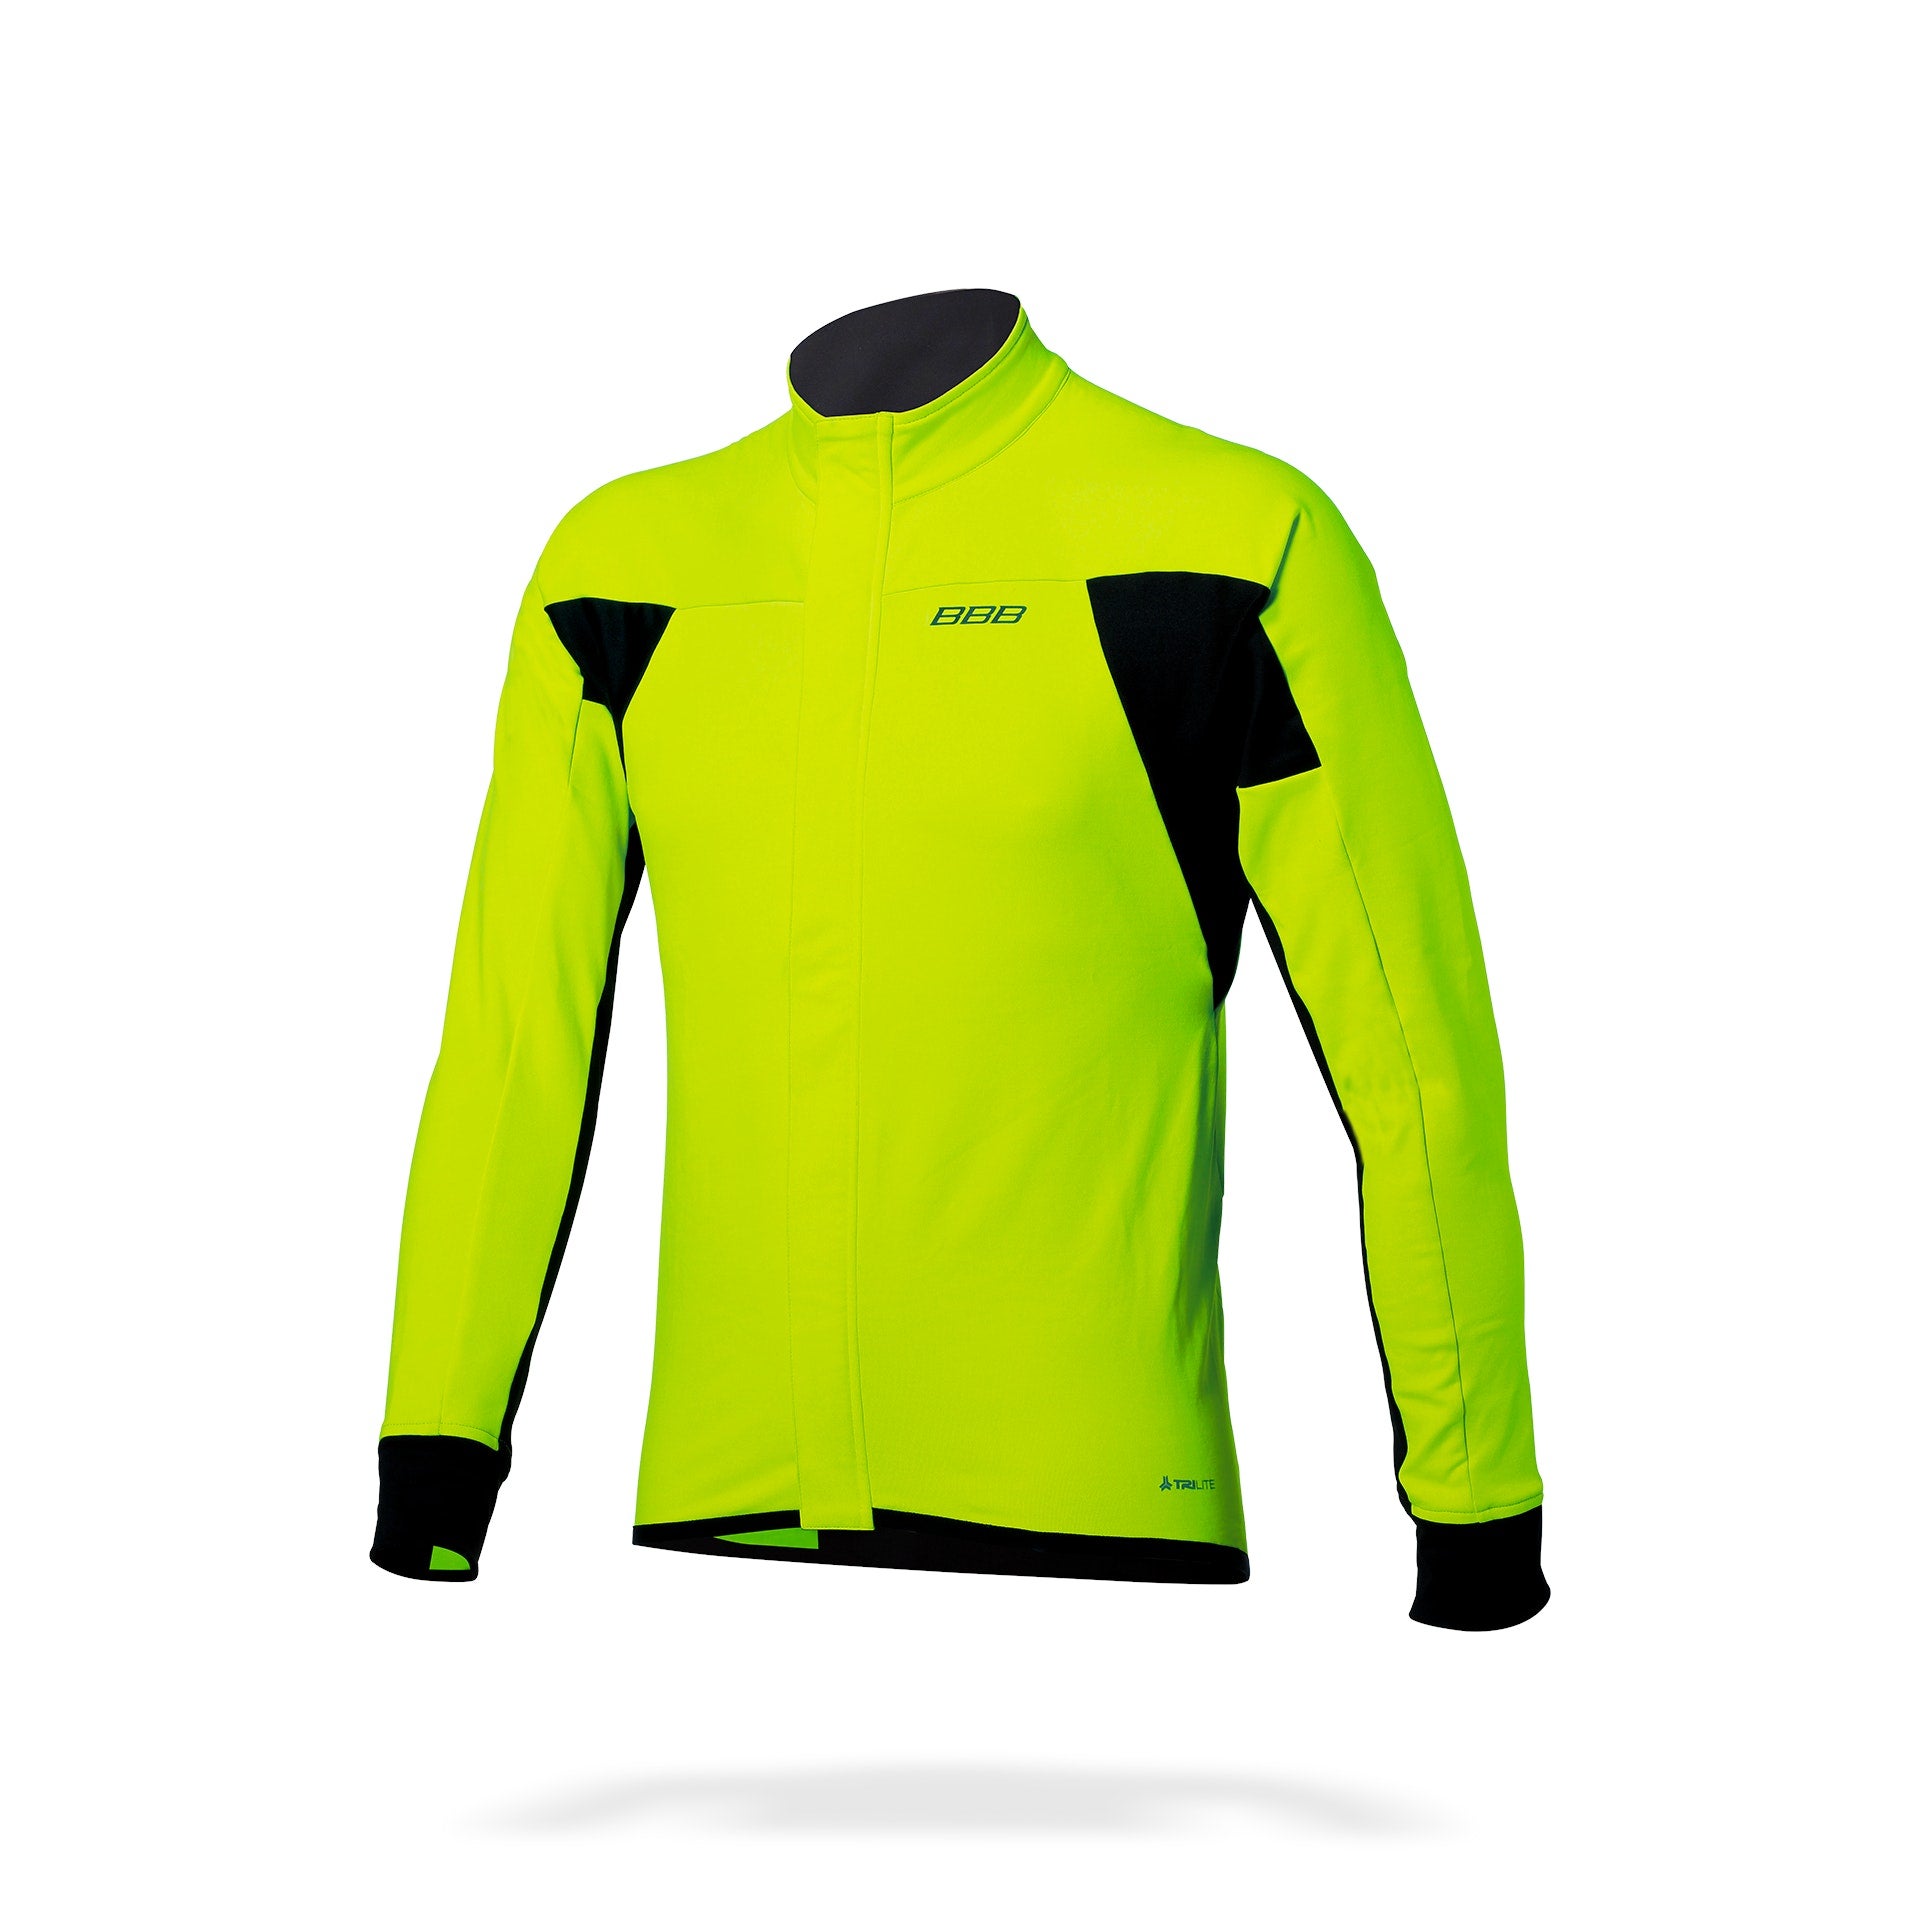 Bbb-Cycling TriGuard Winter Jacket - Neon Yellow Size S